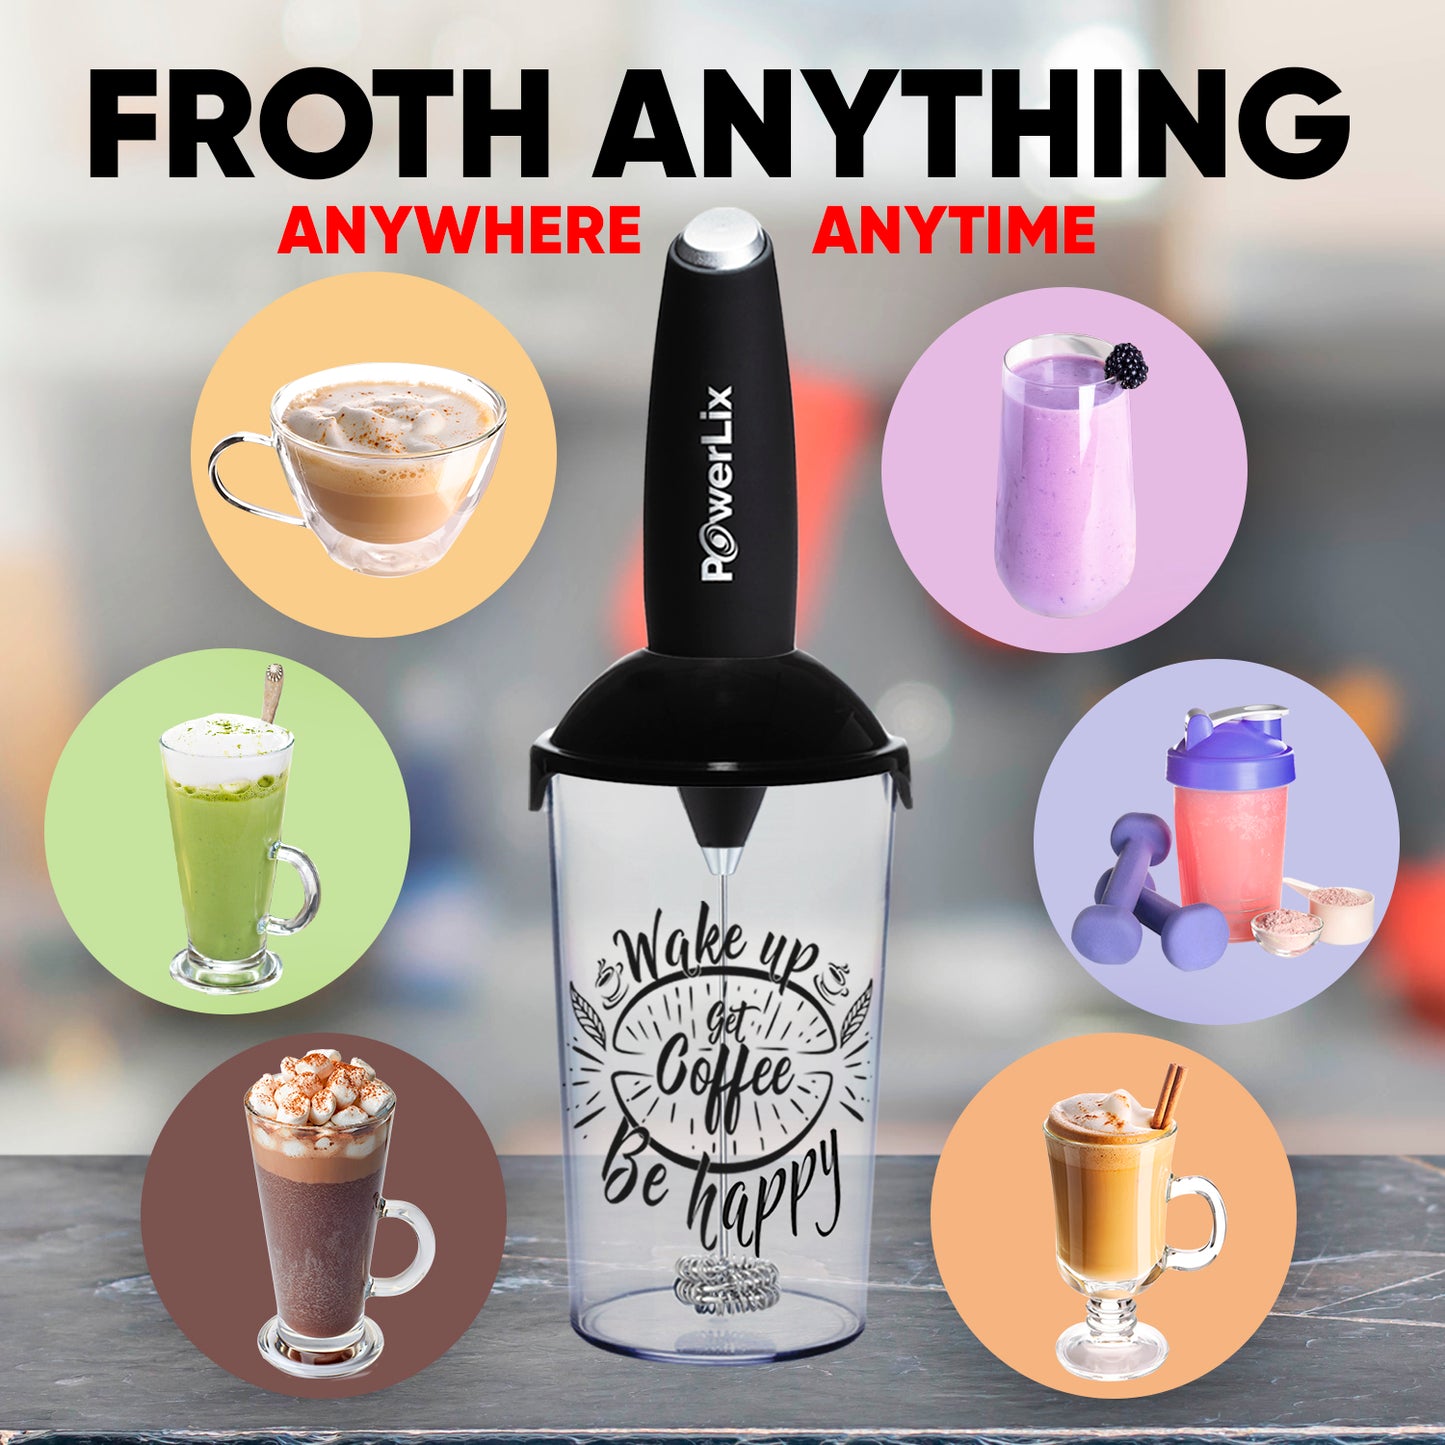 a blender with different drinks with text: 'FROTH ANYTHING ANYWHERE ANYTIME PowerLix up Coffee Be happy'